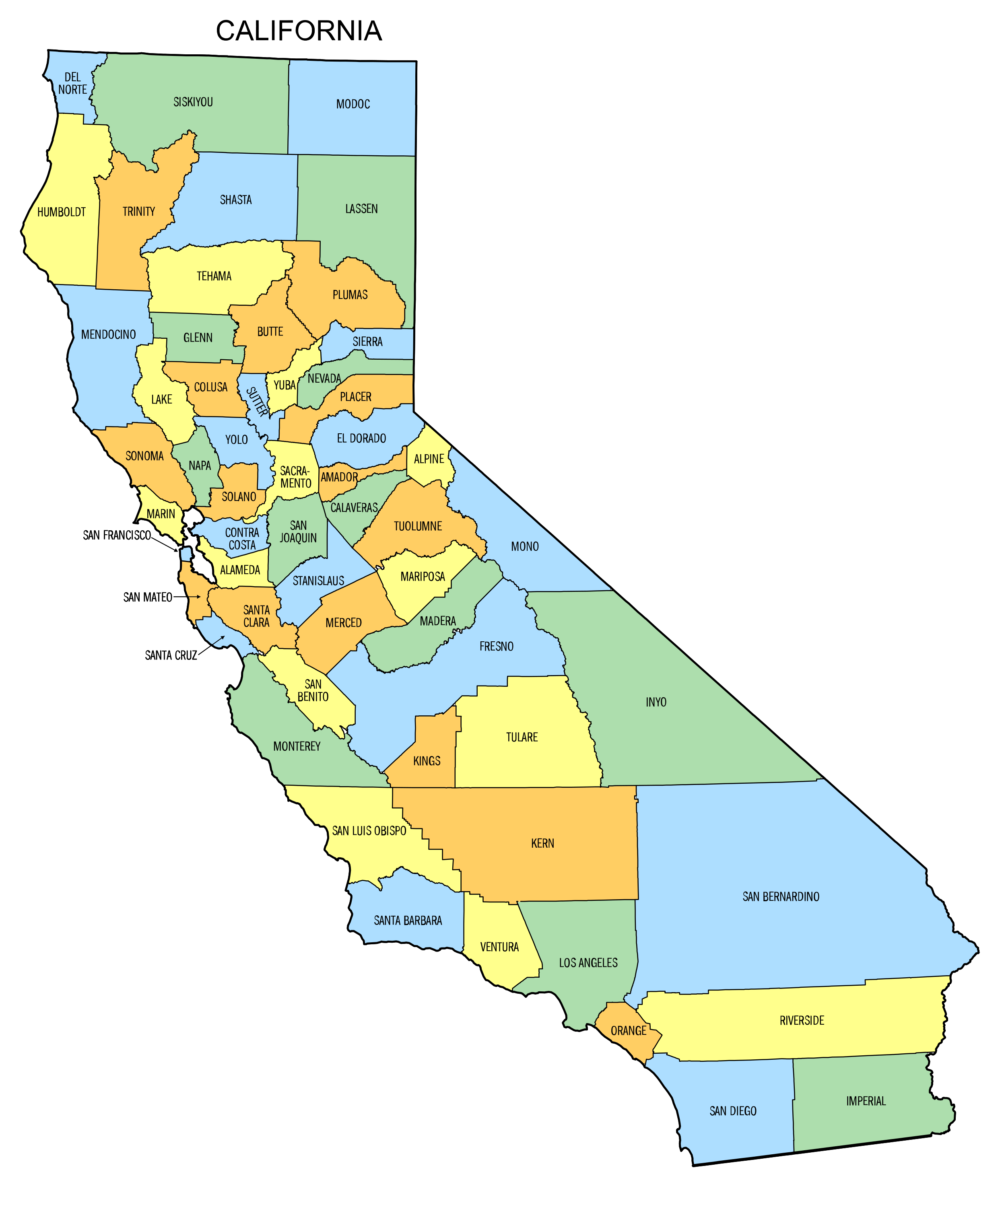 It is a map of California with zones of all the counties